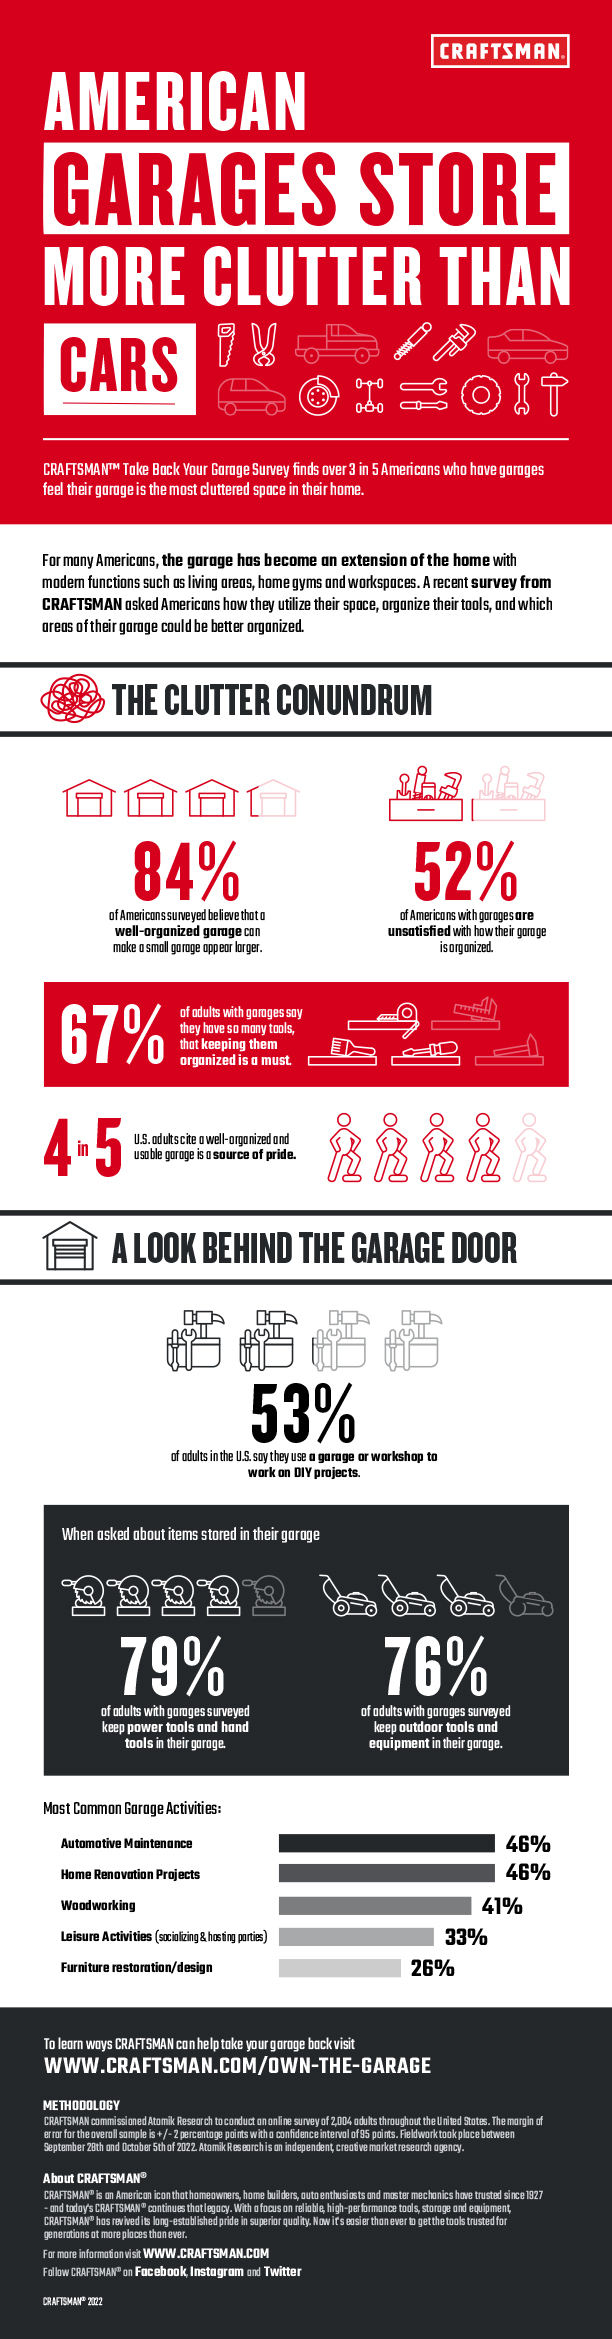 Take Back Your Garage: American Garages Store More Clutter Than Cars, According to CRAFTSMAN® Survey